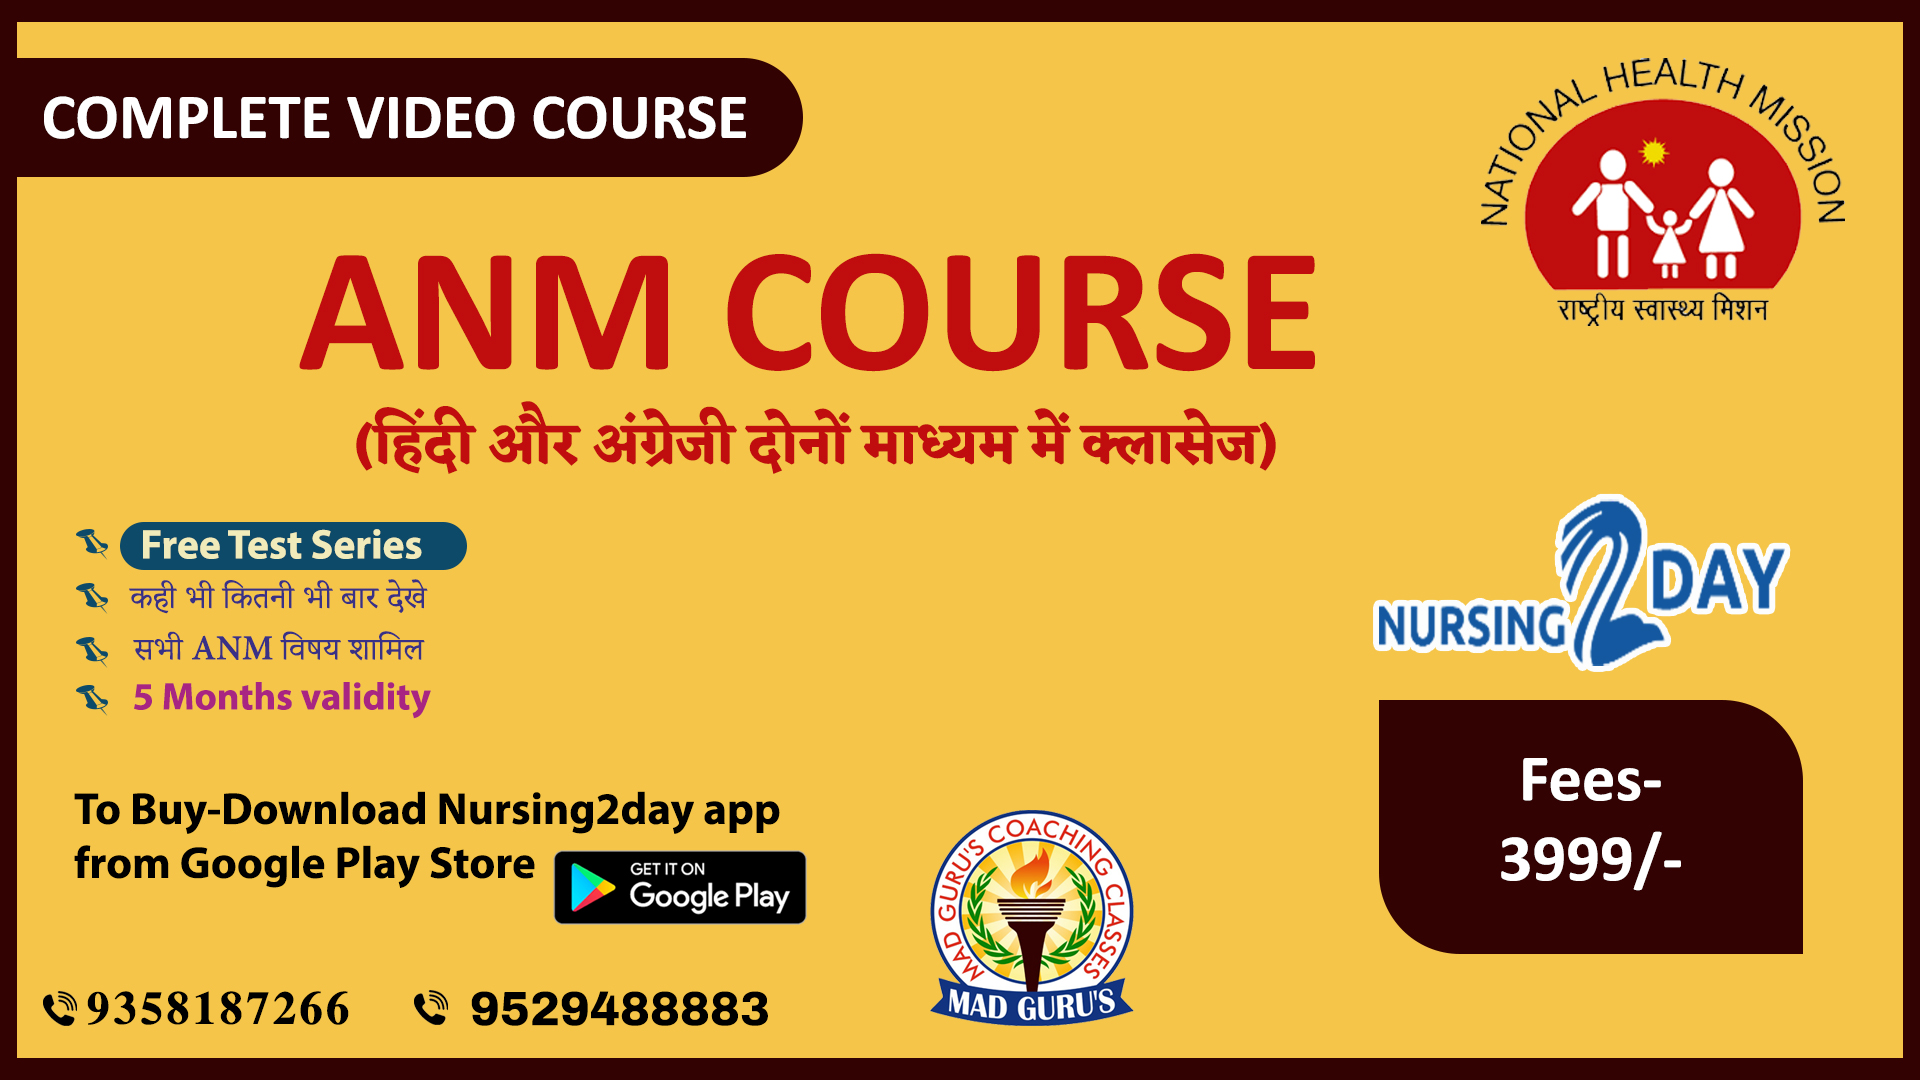 Live YouTube Classes by Dinesh Sir